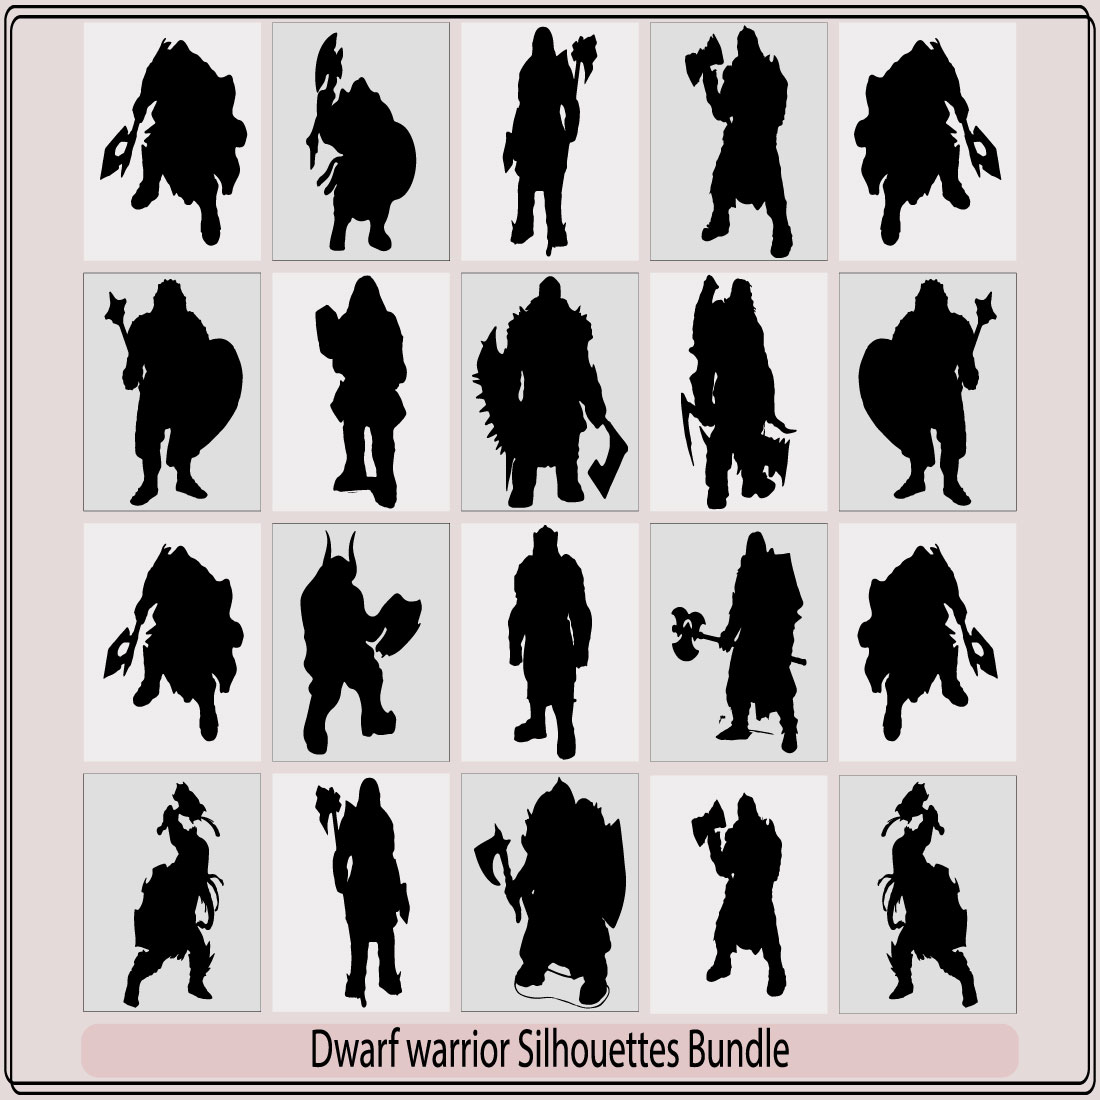 Viking with axe detailed vector silhouette,Gnome and dwarfs blacksmith, gunslinger and warrior silhouette,Black silhouette of a fantasy dwarf preview image.